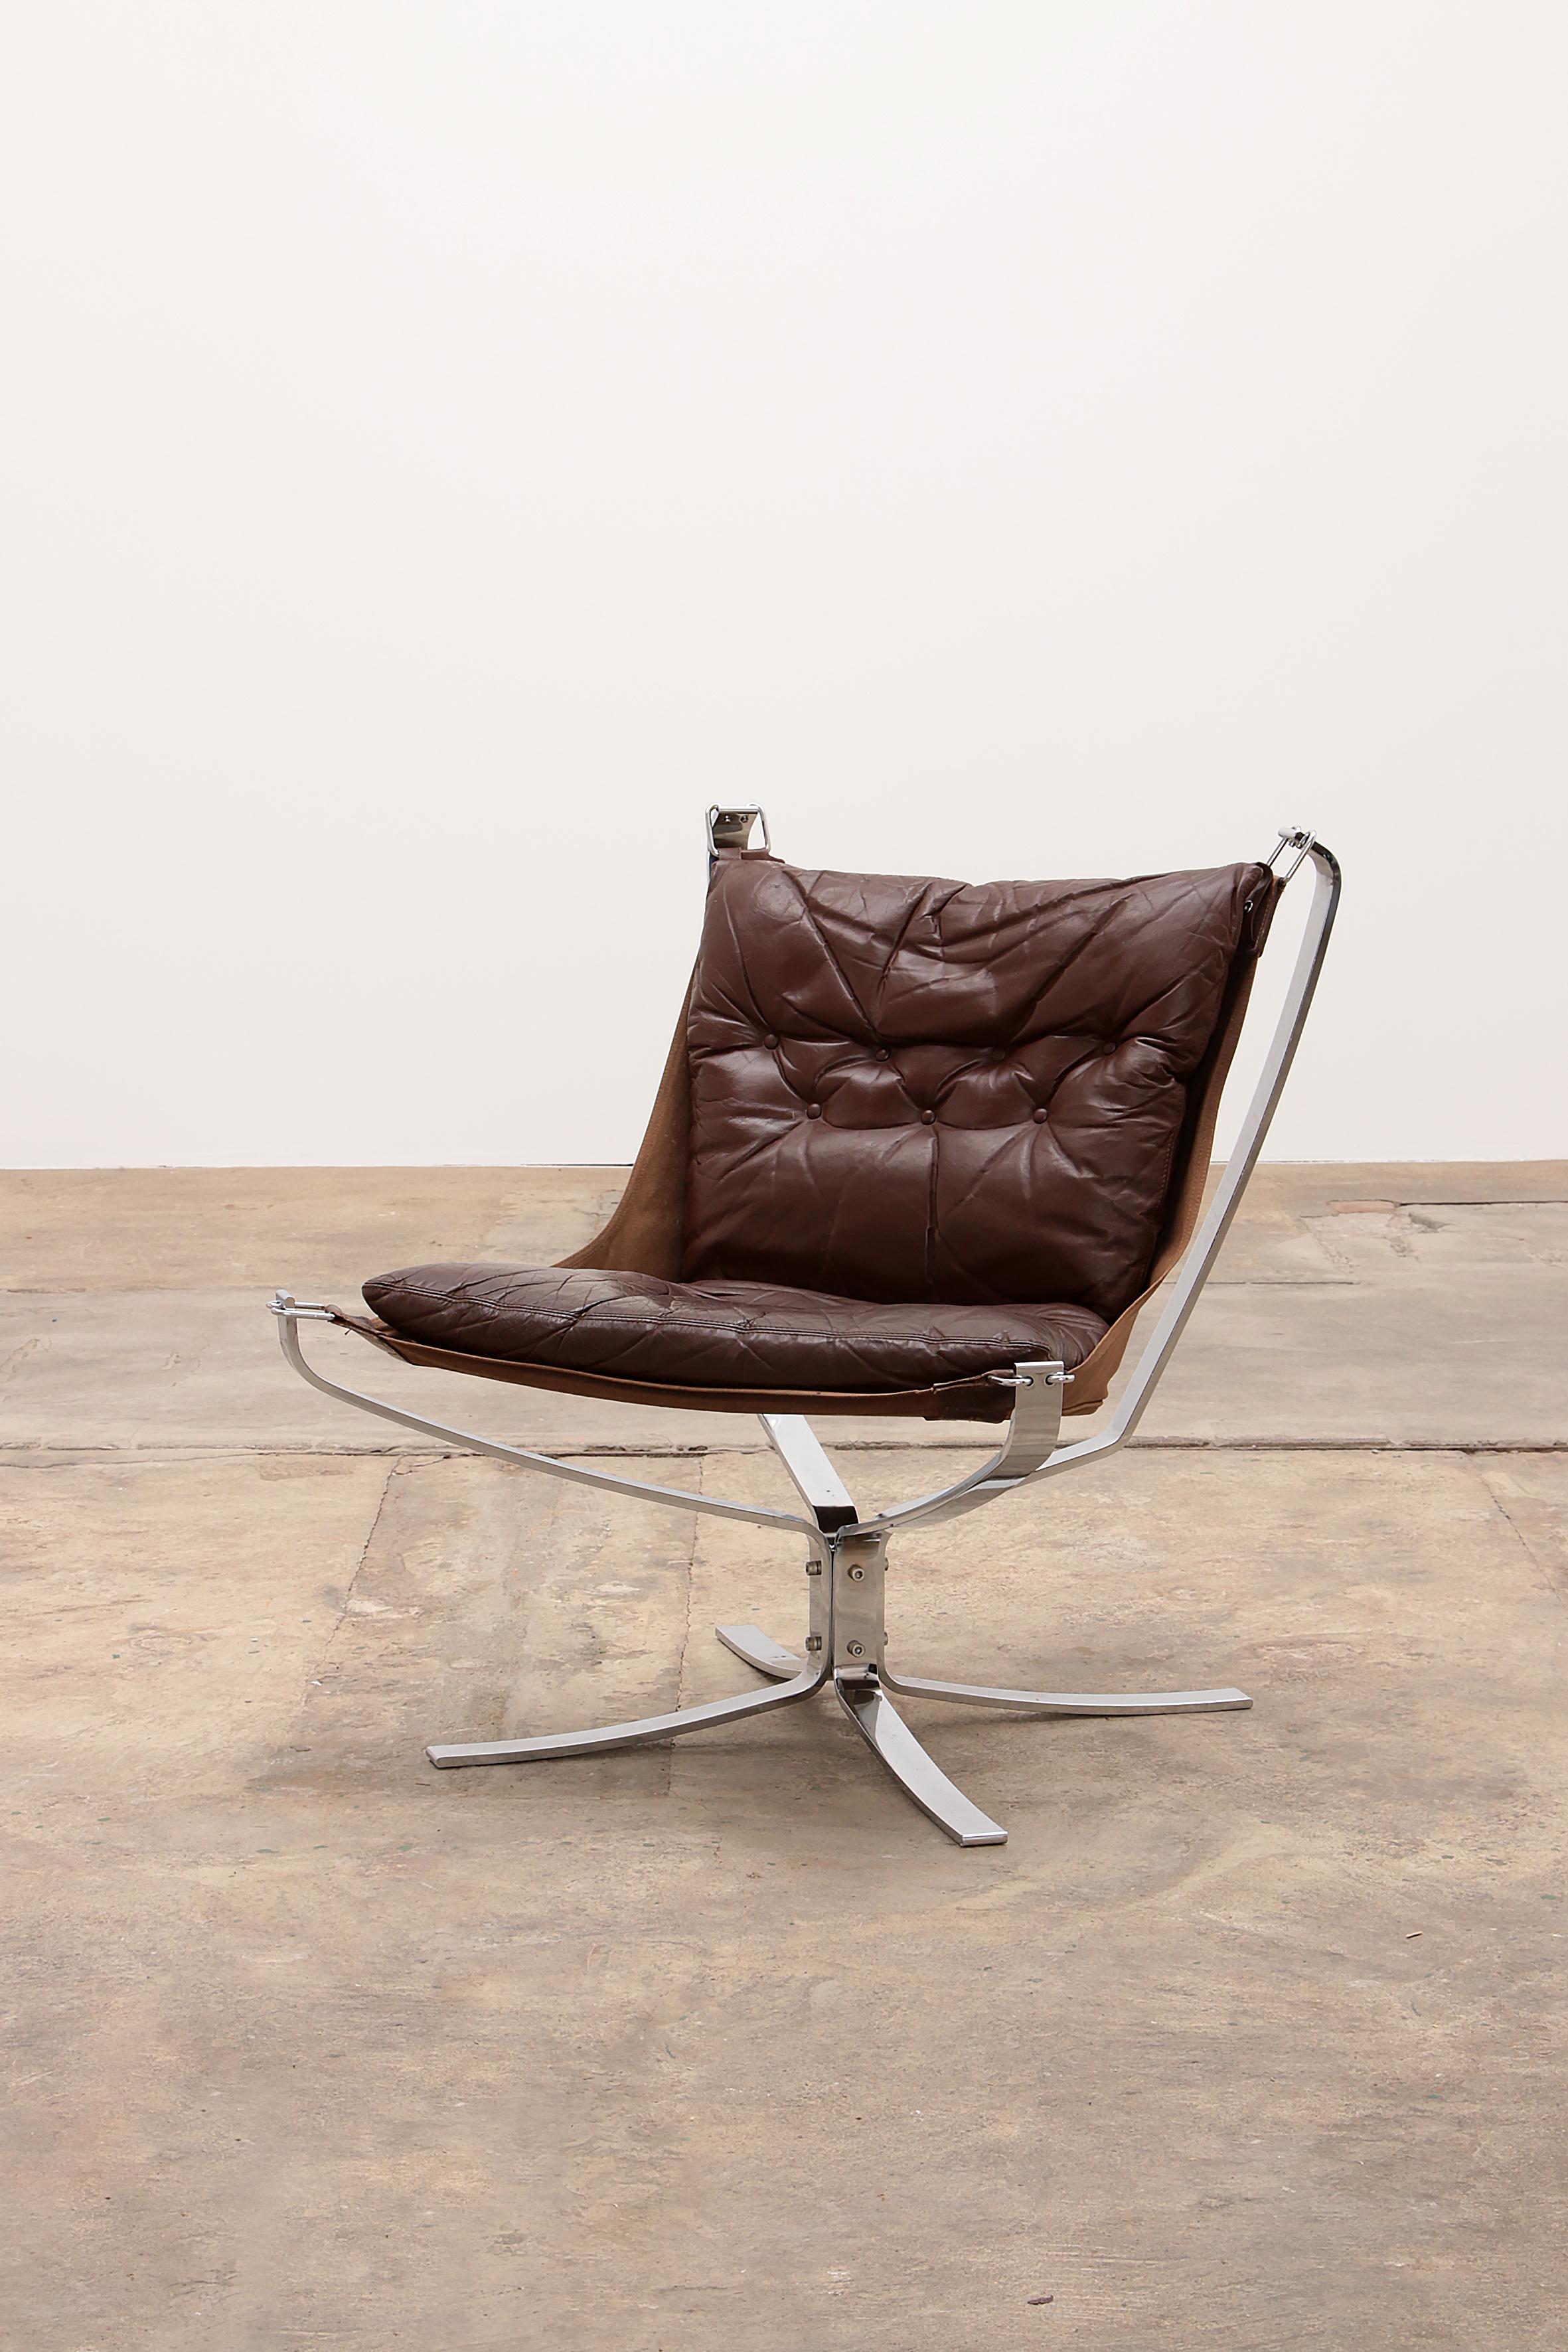 Iconic hanging chair Falcon in brown leather on a chromed steel base, designed by Sigurd Ressel and made by Vatne Møbler in Norway in the 1970s. Falcon chairs are both extremely comfortable and stylish options for home office chairs, lounge chairs